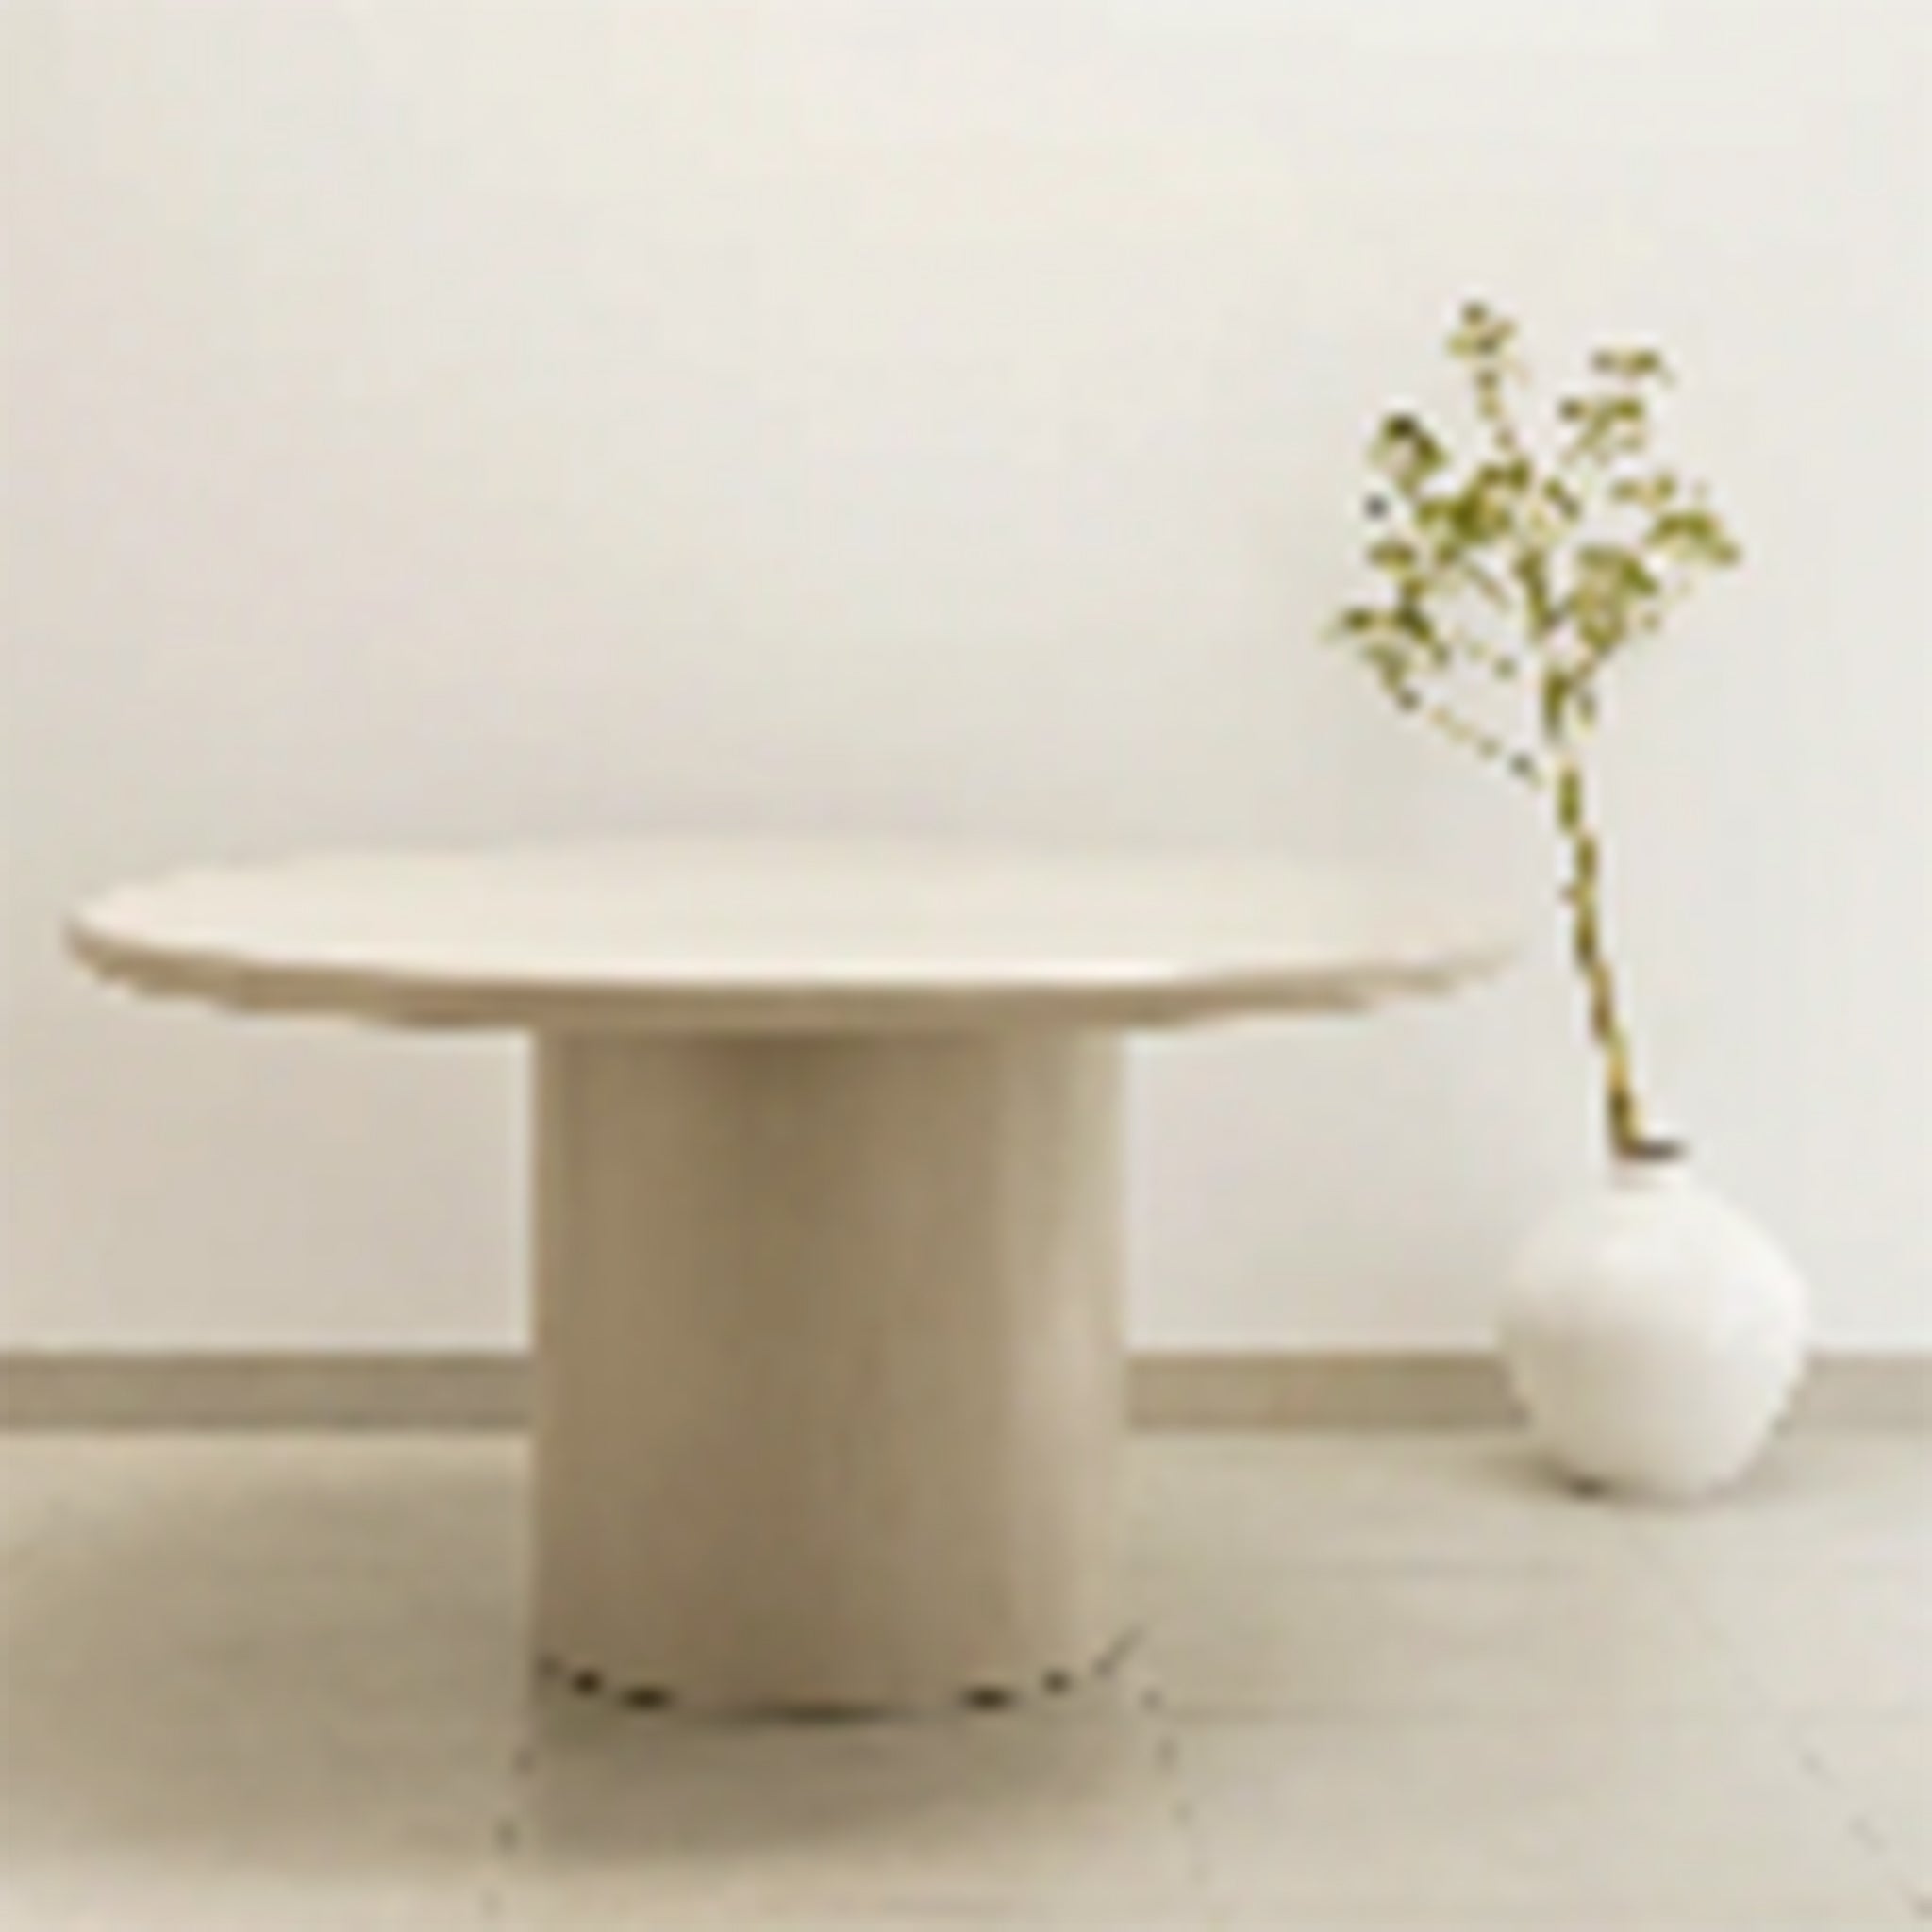 Elegant round dining table featuring a smooth, beige finish